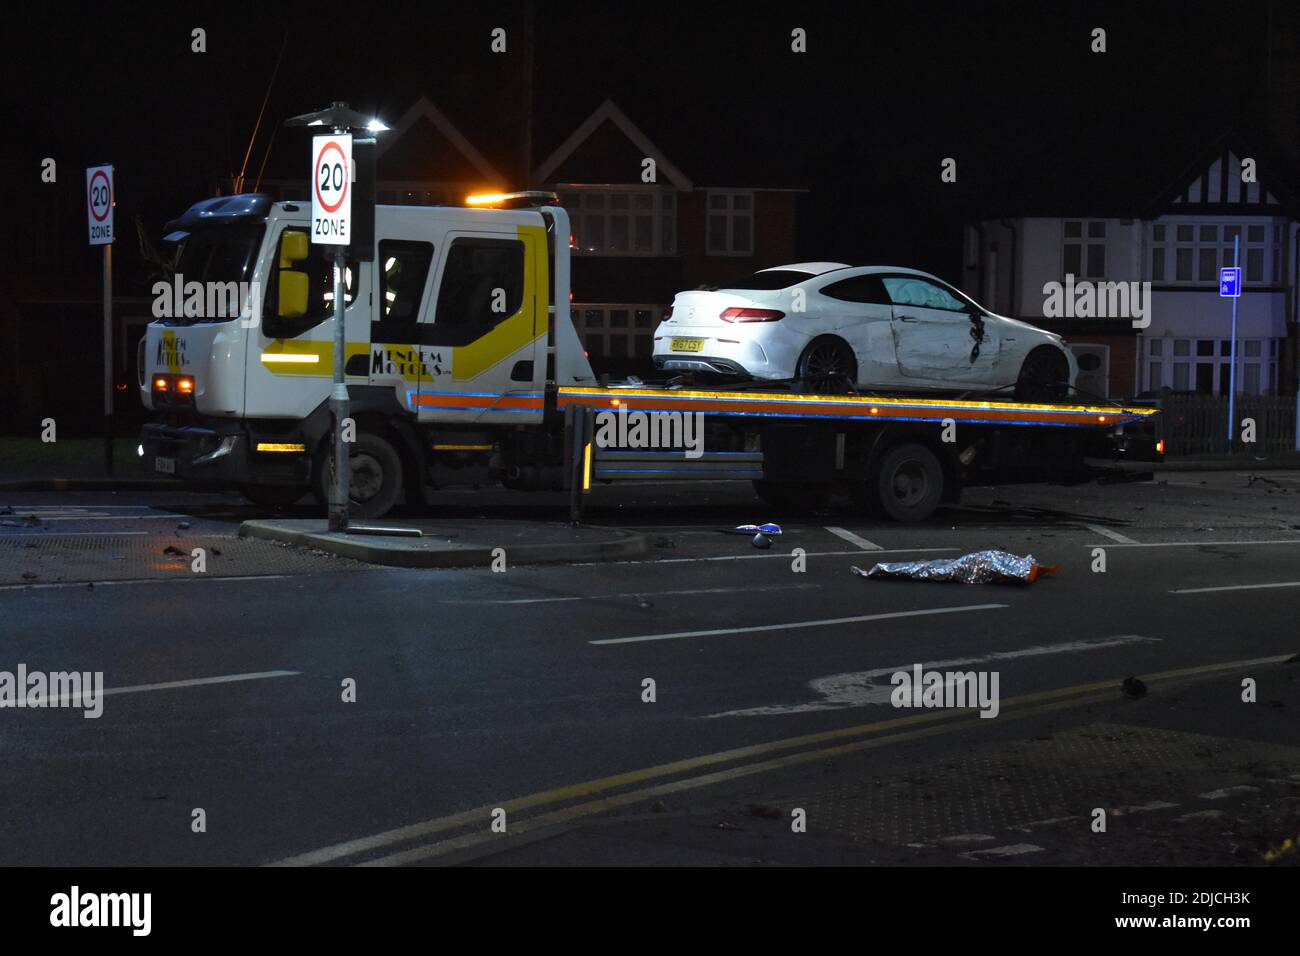 Police recover white mercedes in Southcote Lane, Reading Berkshire. Charles Dye / Alamy Live News Stock Photo